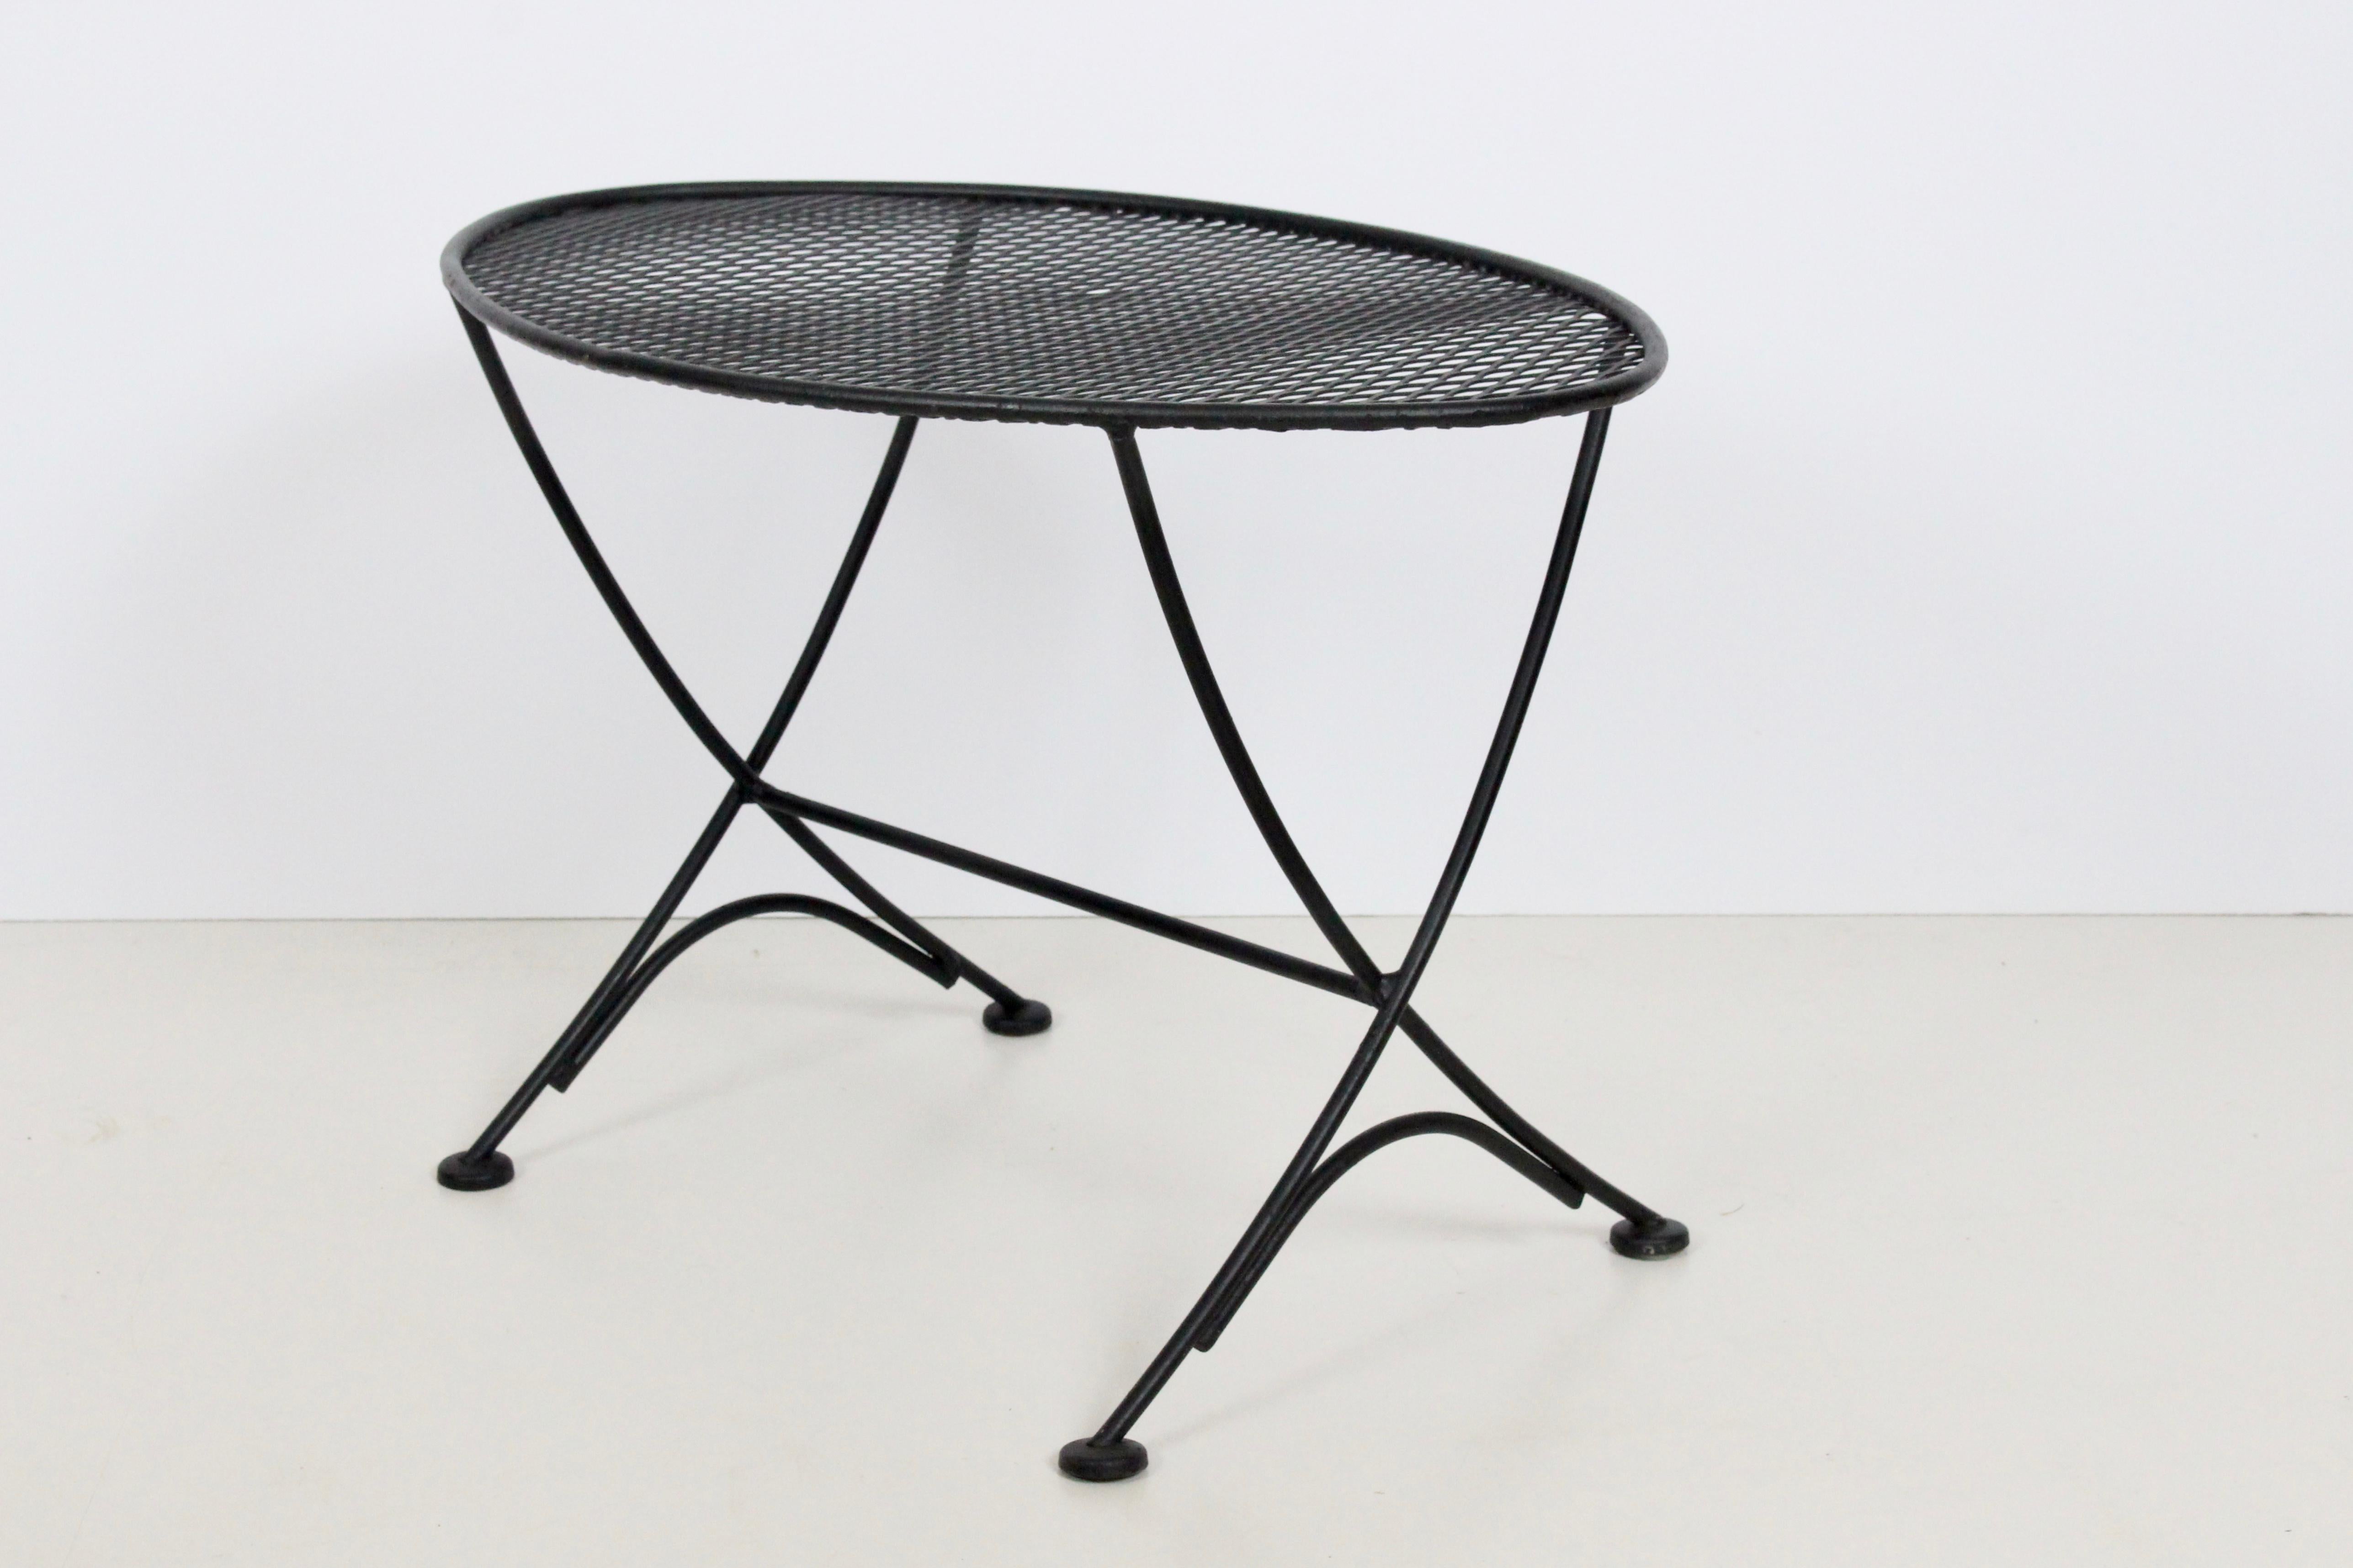 Original Maurizio Tempestini for Salterini black wrought iron and metal mesh oval occasional table, small coffee table, end table, side table. for indoor / outdoor use. Kindly note that Professional Packaging costs will be needed to ensure safe and